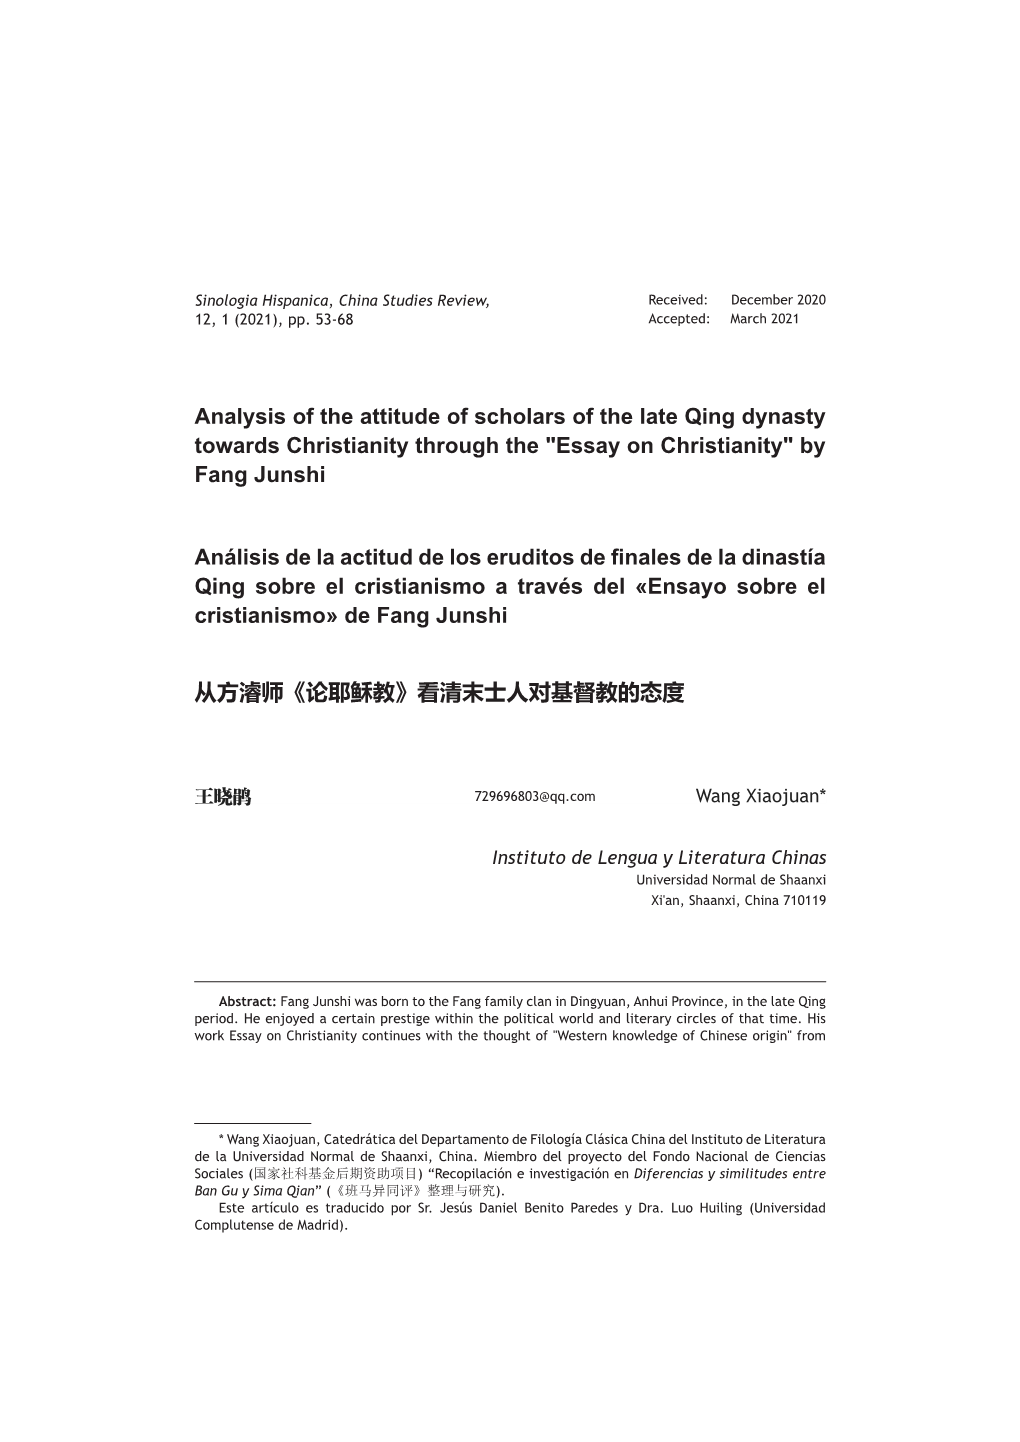 Analysis of the Attitude of Scholars of the Late Qing Dynasty Towards Christianity Through the "Essay on Christianity" by Fang Junshi